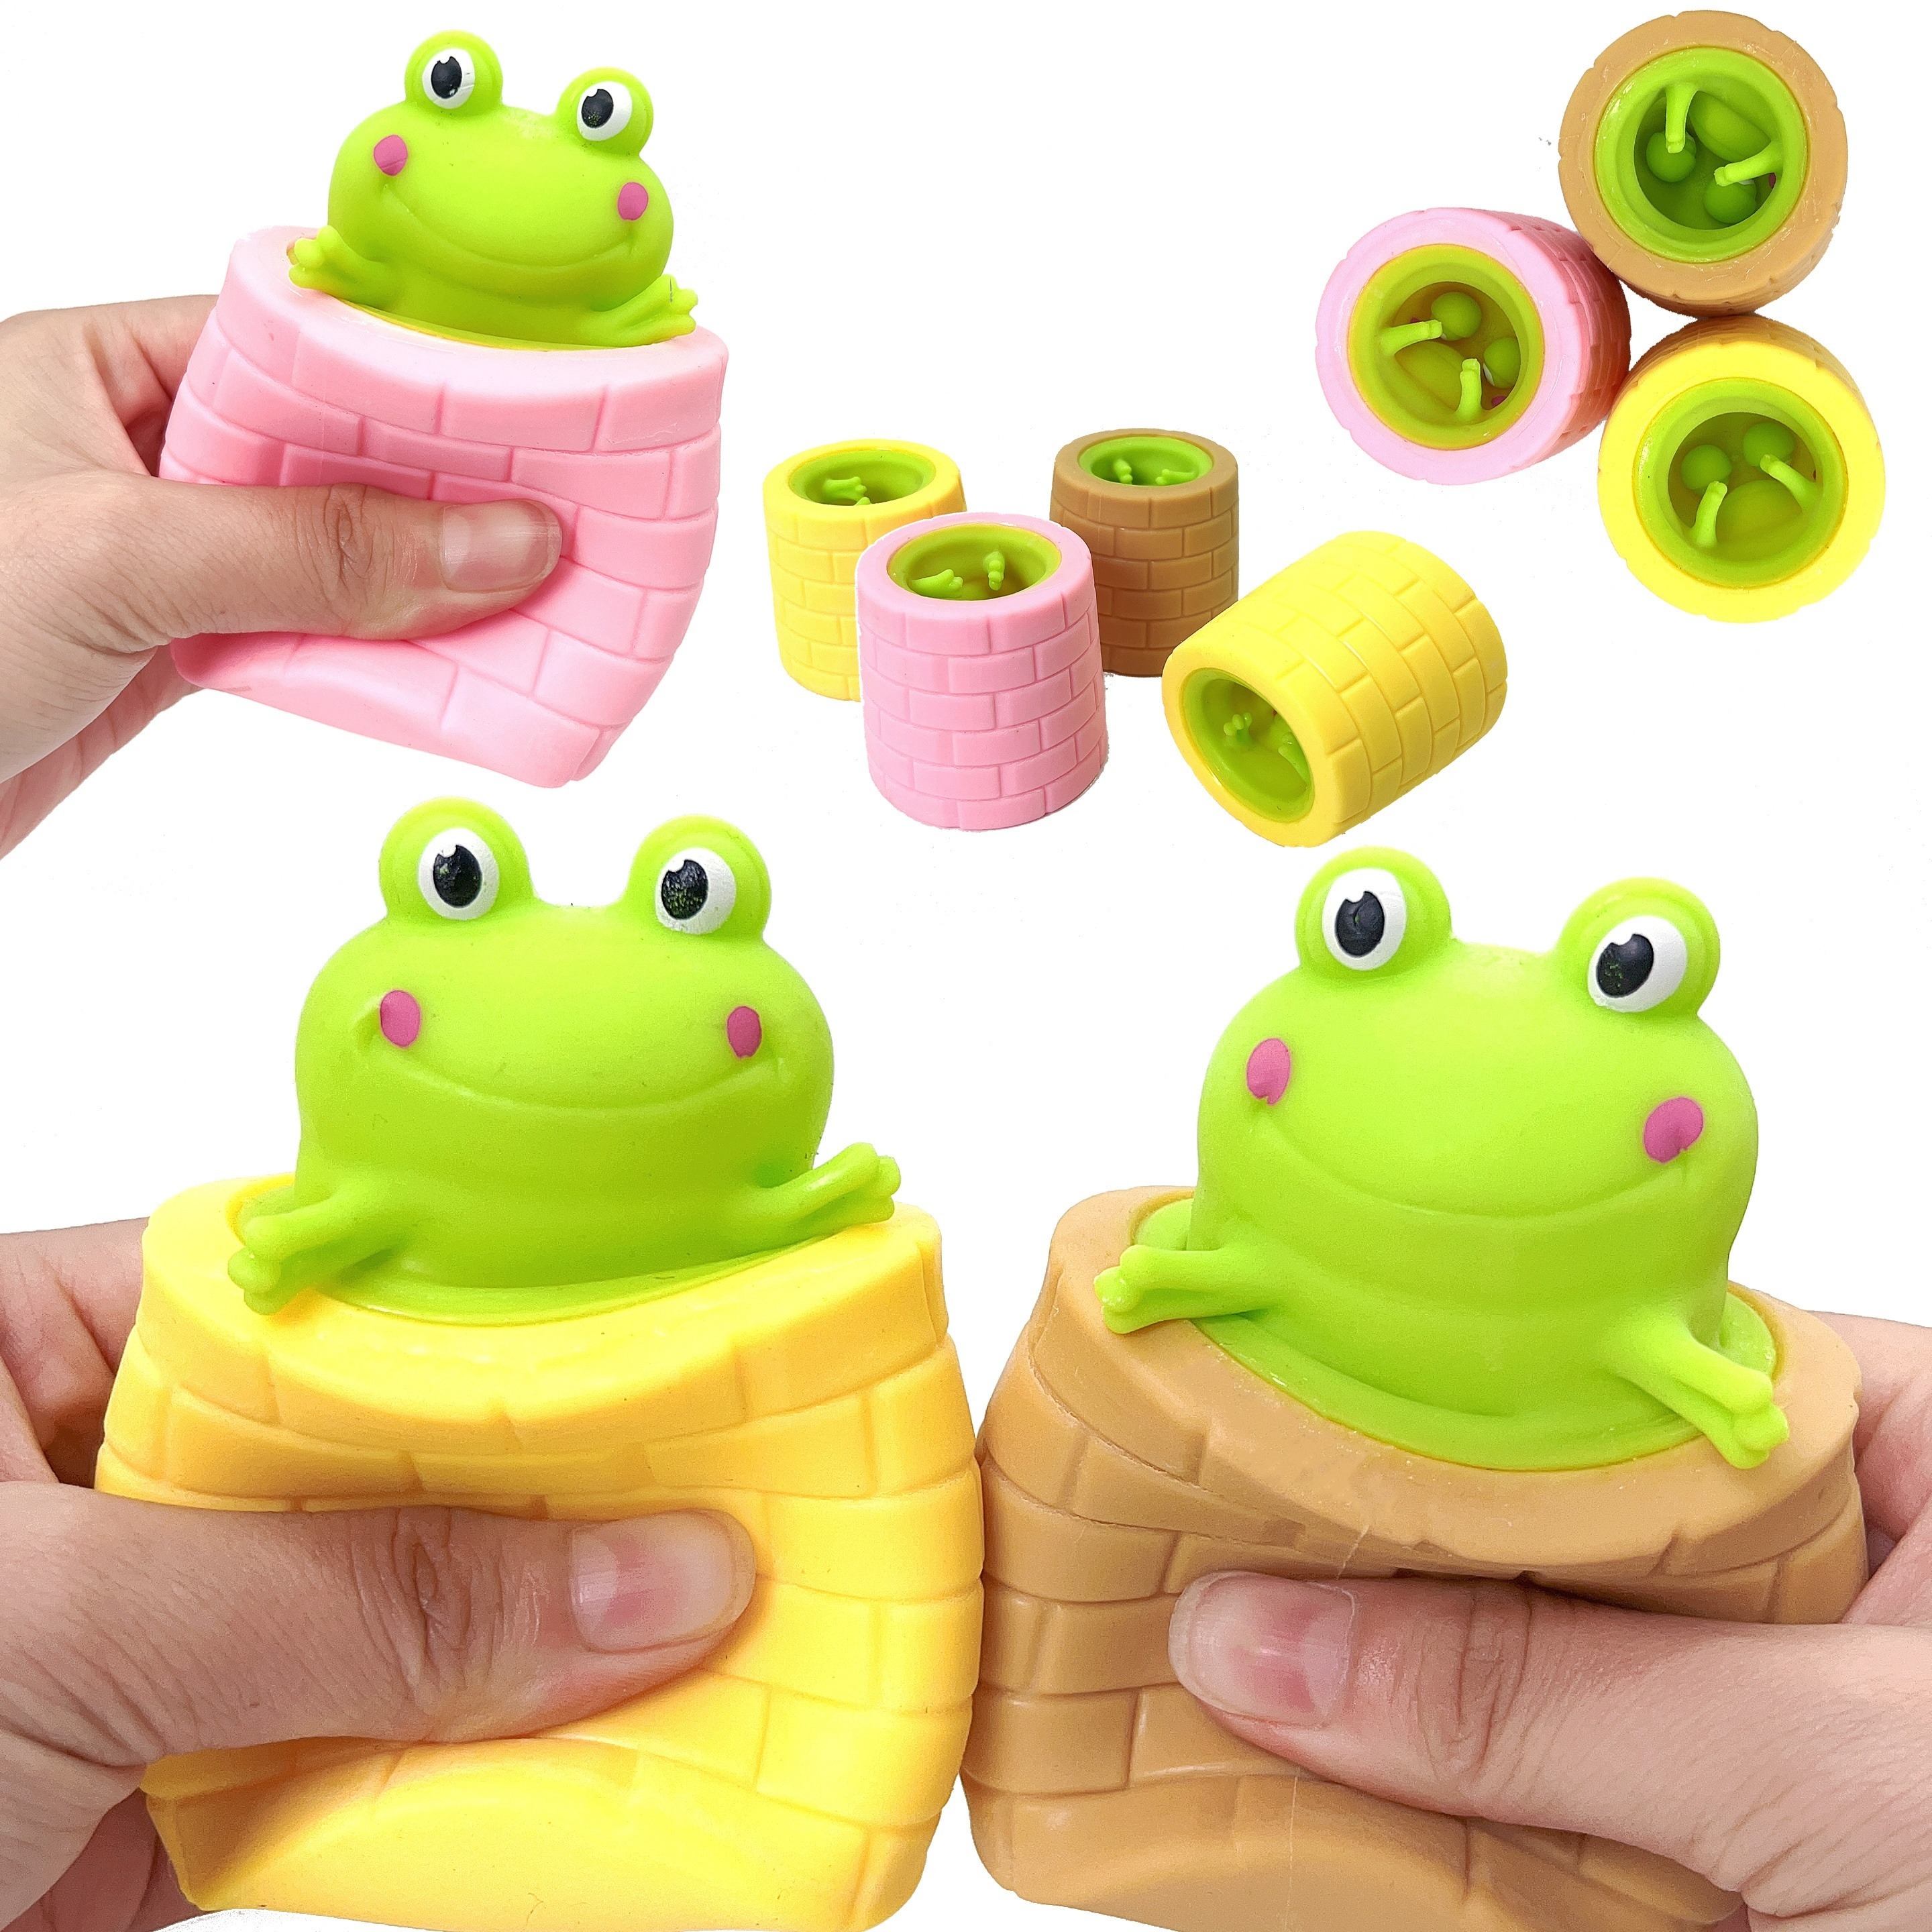 Scrazy Cute Frog With Baby Frog - Cute Frog With Baby Frog . Buy Frog toys  in India. shop for Scrazy products in India.